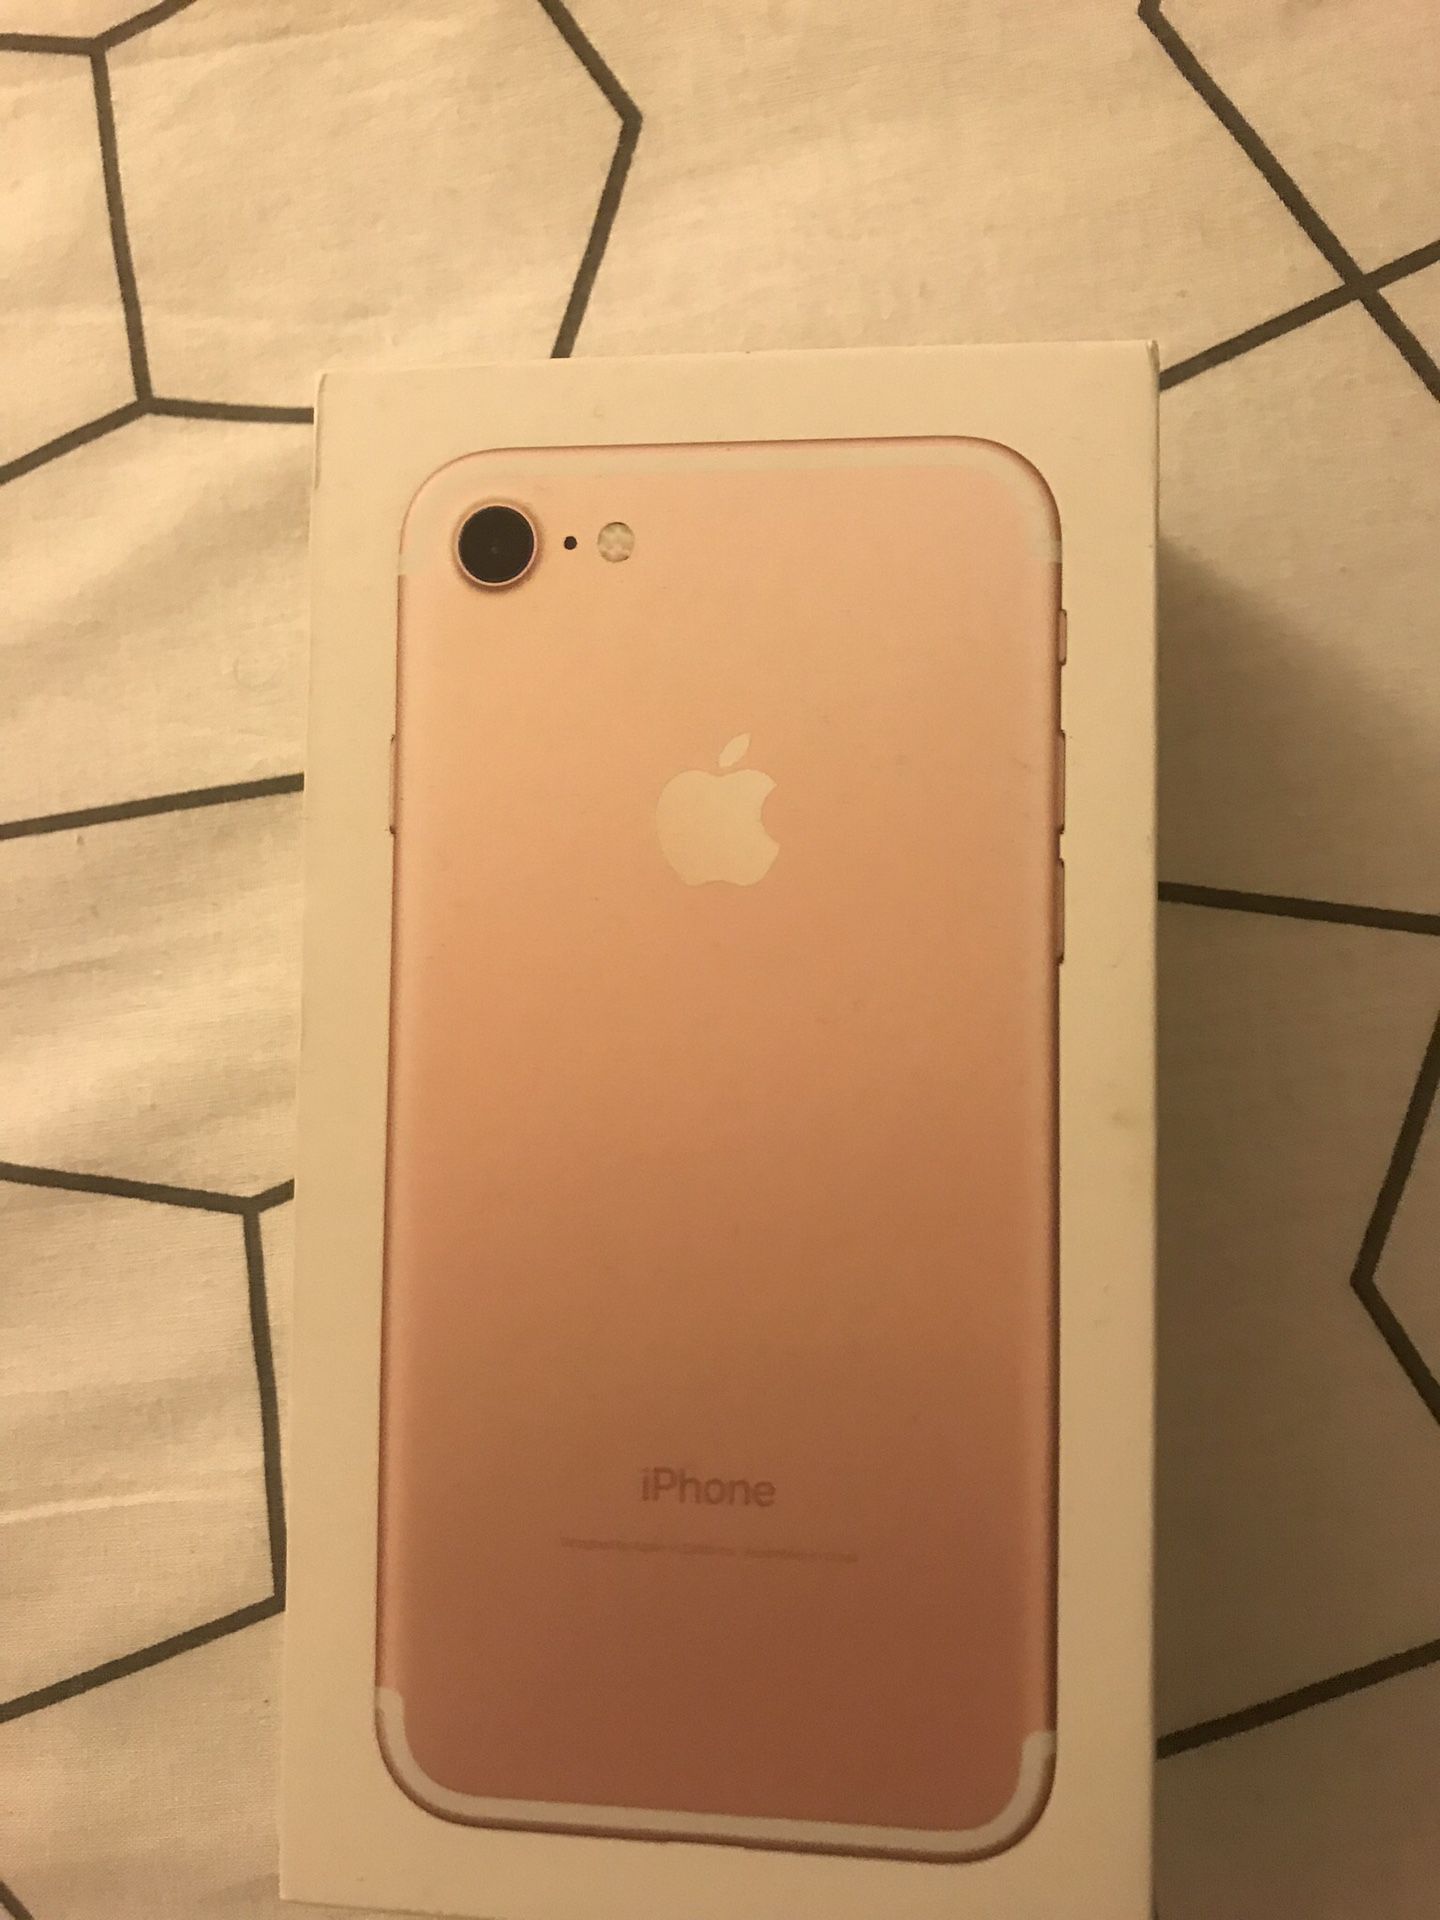 iPhone 7 126GB Rose Gold with charger and headphones